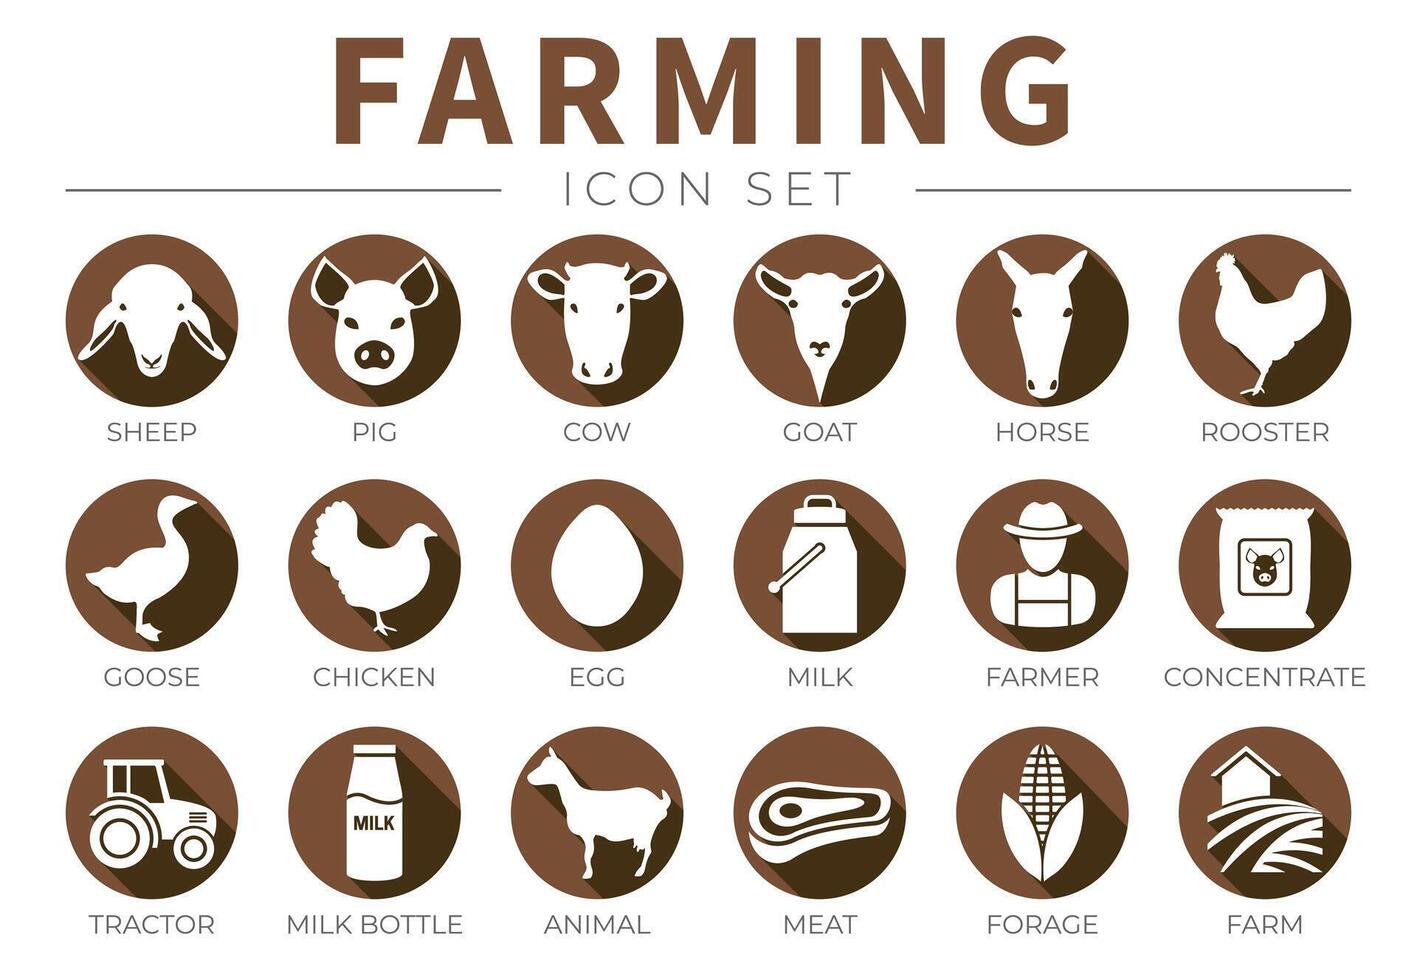 Brown Farming Icon Set with Farm Animals of Sheep, Pig, Cow, Goat, Horse, Rooster, Goose, Chicken, Egg, Milk, Farmer, Concentrate, Tractor, Bottle, Animal, Meat and Forage Icons. vector